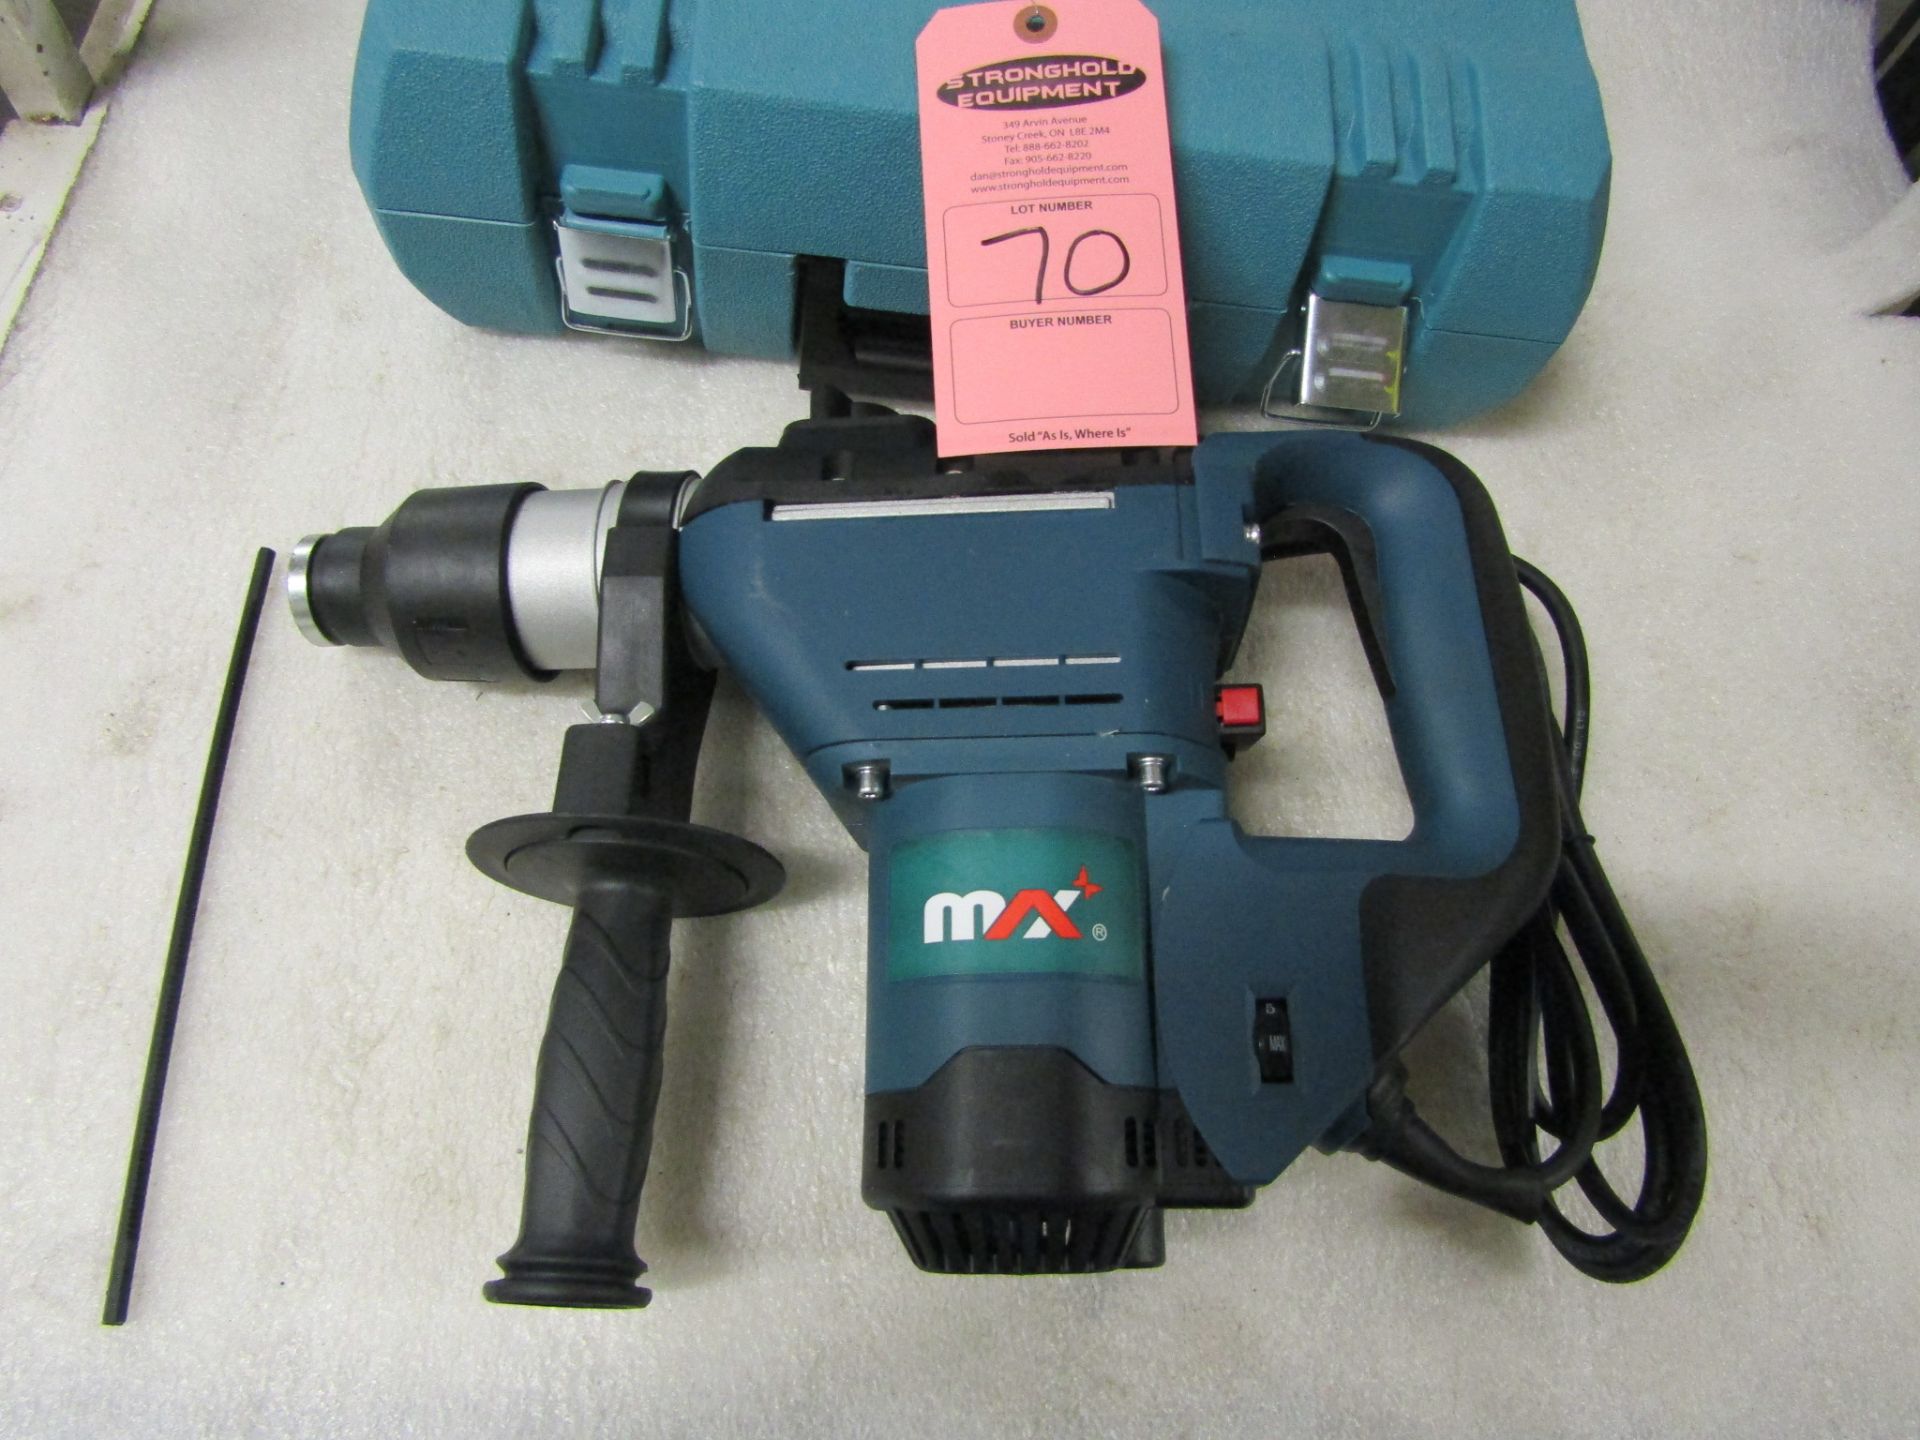 BRAND NEW Max Electric Rotary Hammer unit with 20mm / 3/4" chuck